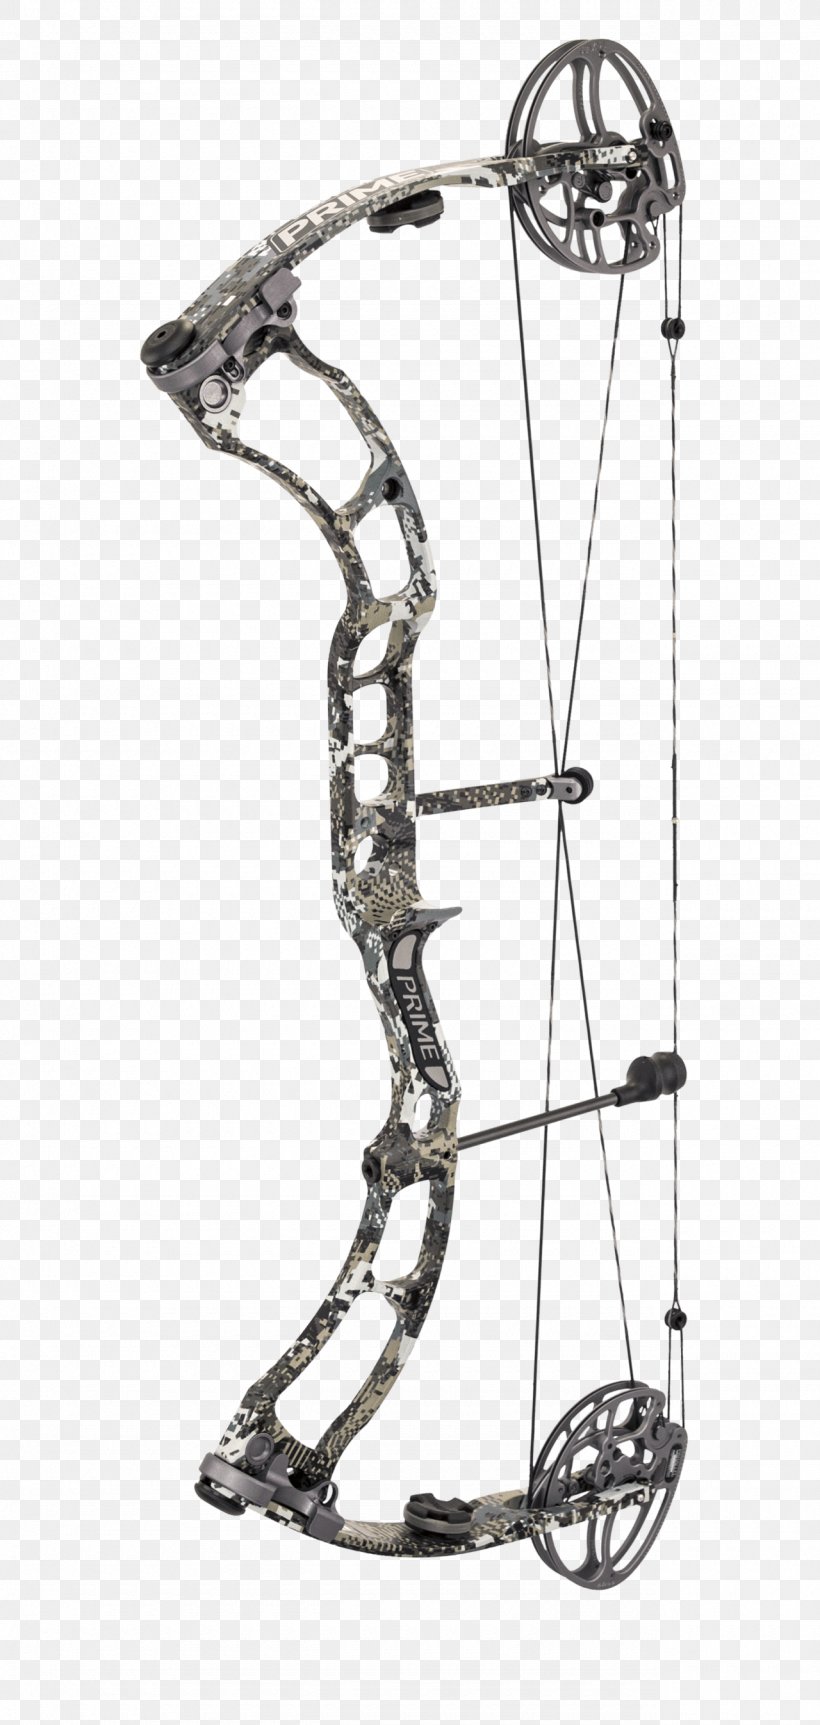 Bow And Arrow Compound Bows Archery Bowhunting, PNG, 1280x2693px, Bow And Arrow, Archery, Bit, Bow, Bowhunting Download Free